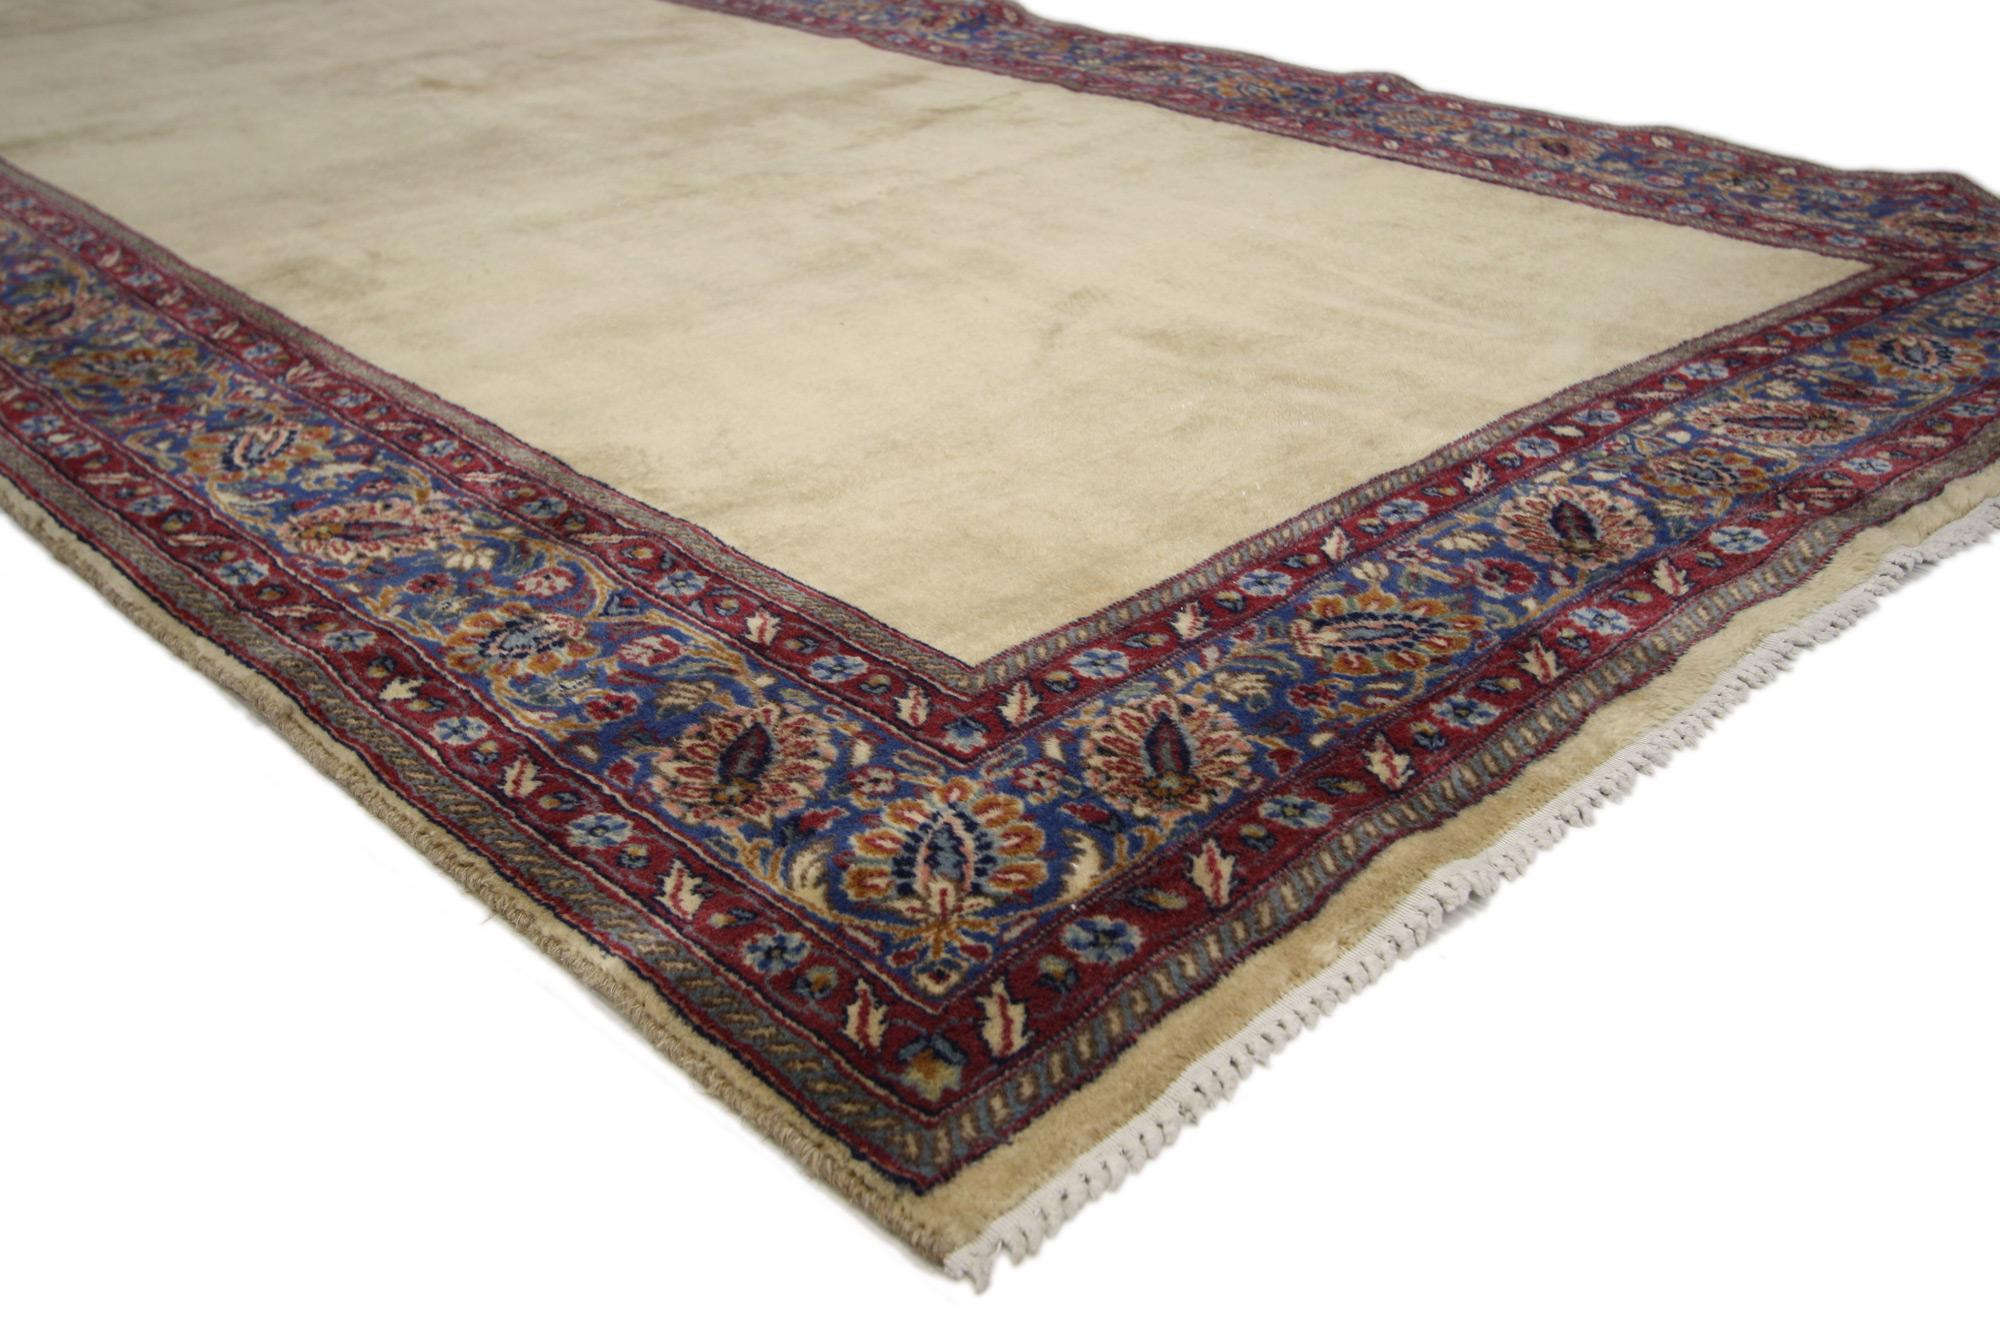 60735 Antique Persian Mashhad Gallery Rug, 05'00 x 21'09.
Emulating timeless style with incredible detail and texture, this antique Persian Mashhad rug is a captivating vision of woven beauty. The open coveted field and earthy colorway woven into